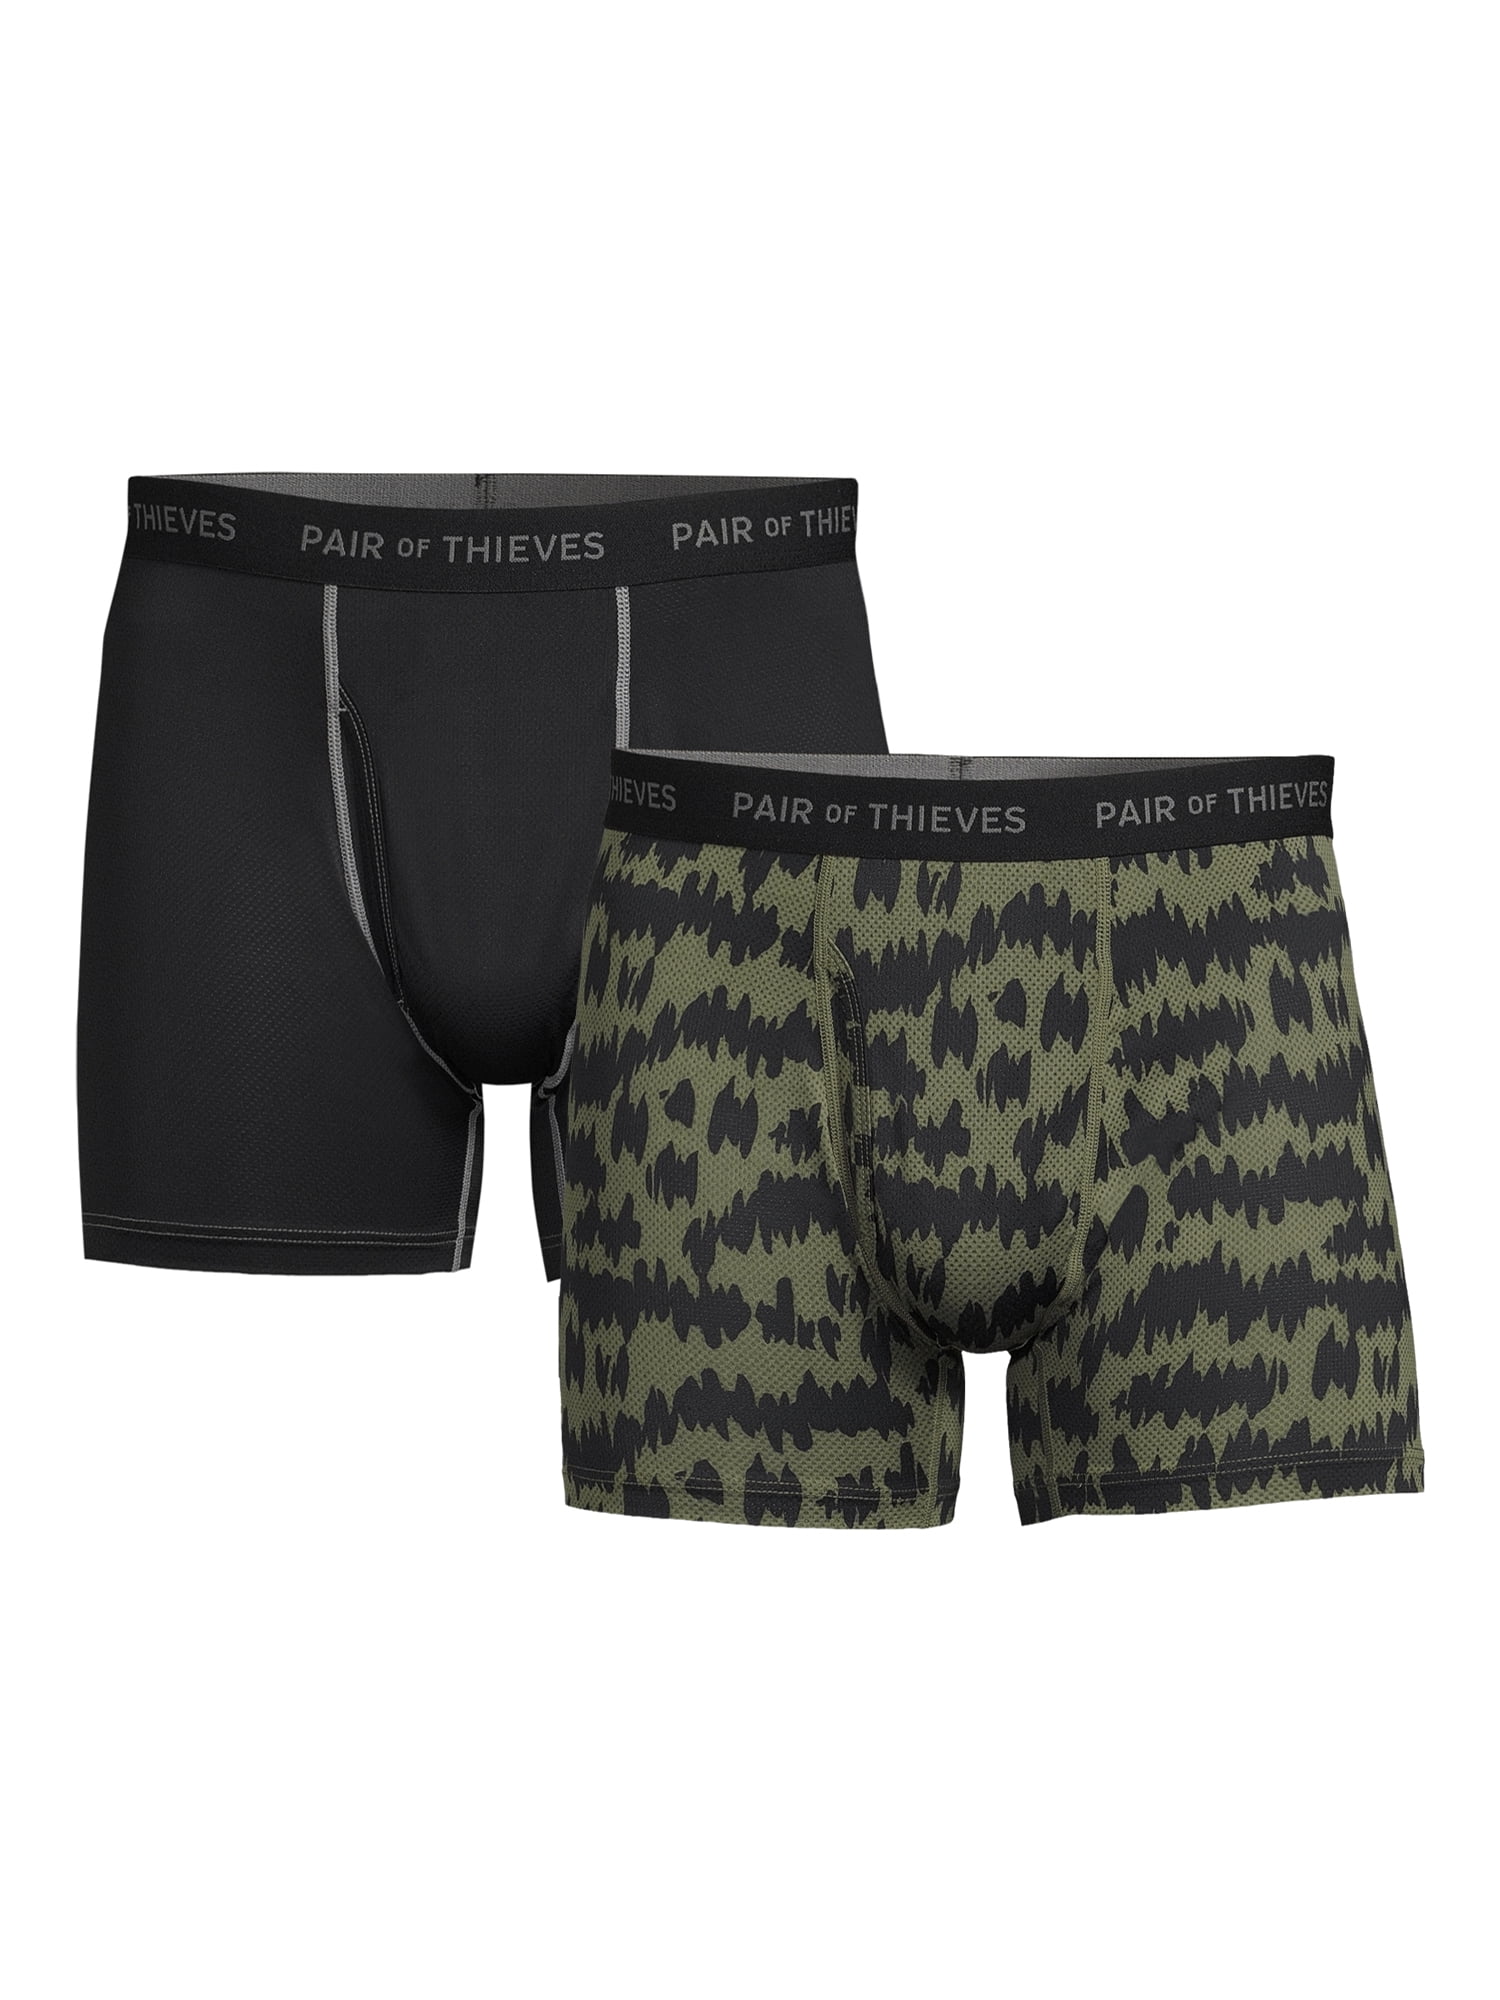 PAIR OF THIEVES Tap Water Park Mens Boxer Briefs - BLK/MULTI